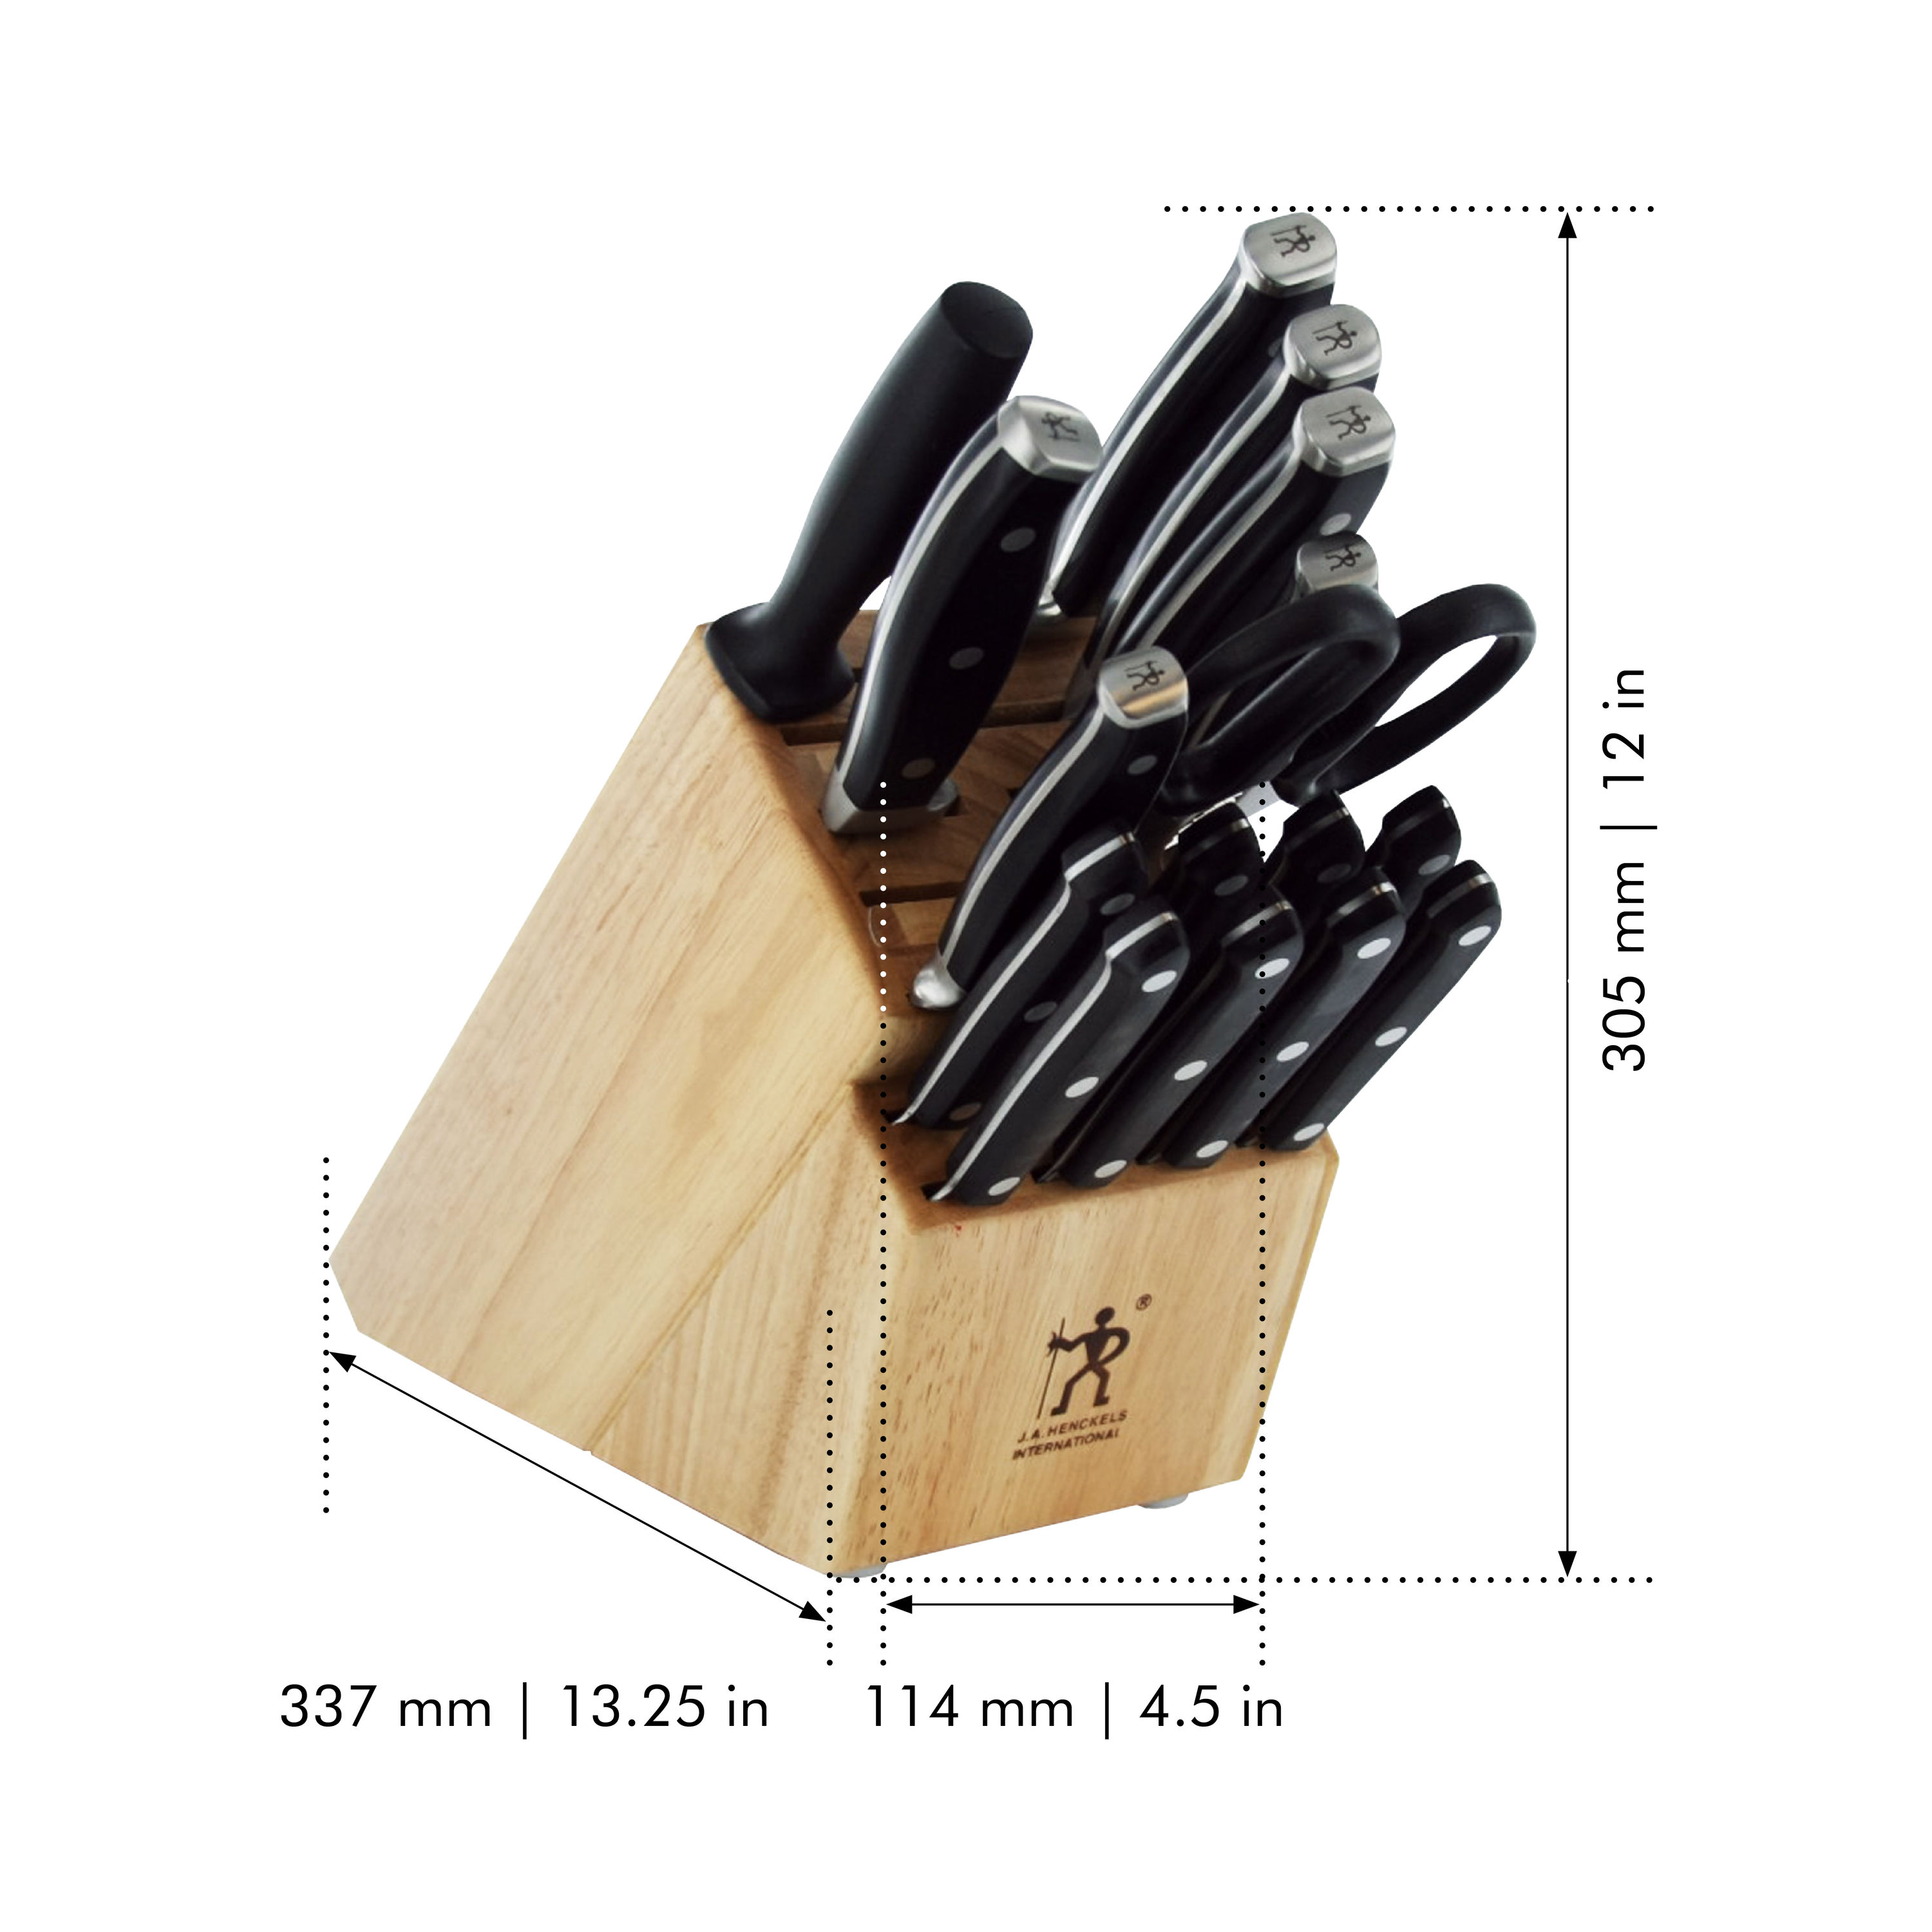 Reviews and Ratings for Zwilling J.A. Henckels Mincing Set with